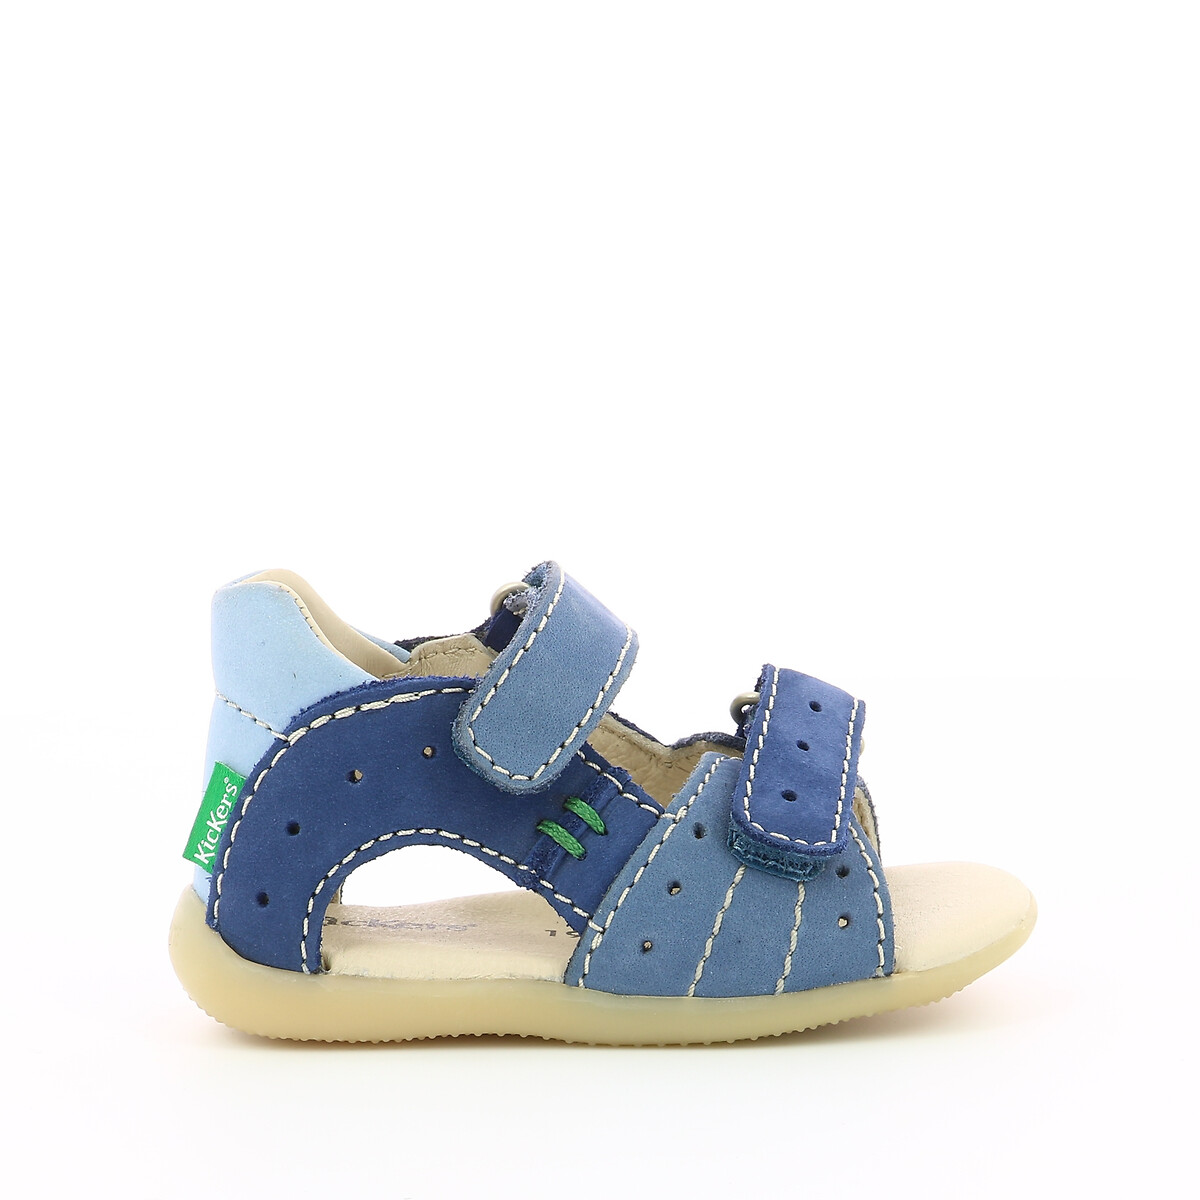 Kids Boping Leather Sandals with Touch ’n’ Close Fastening